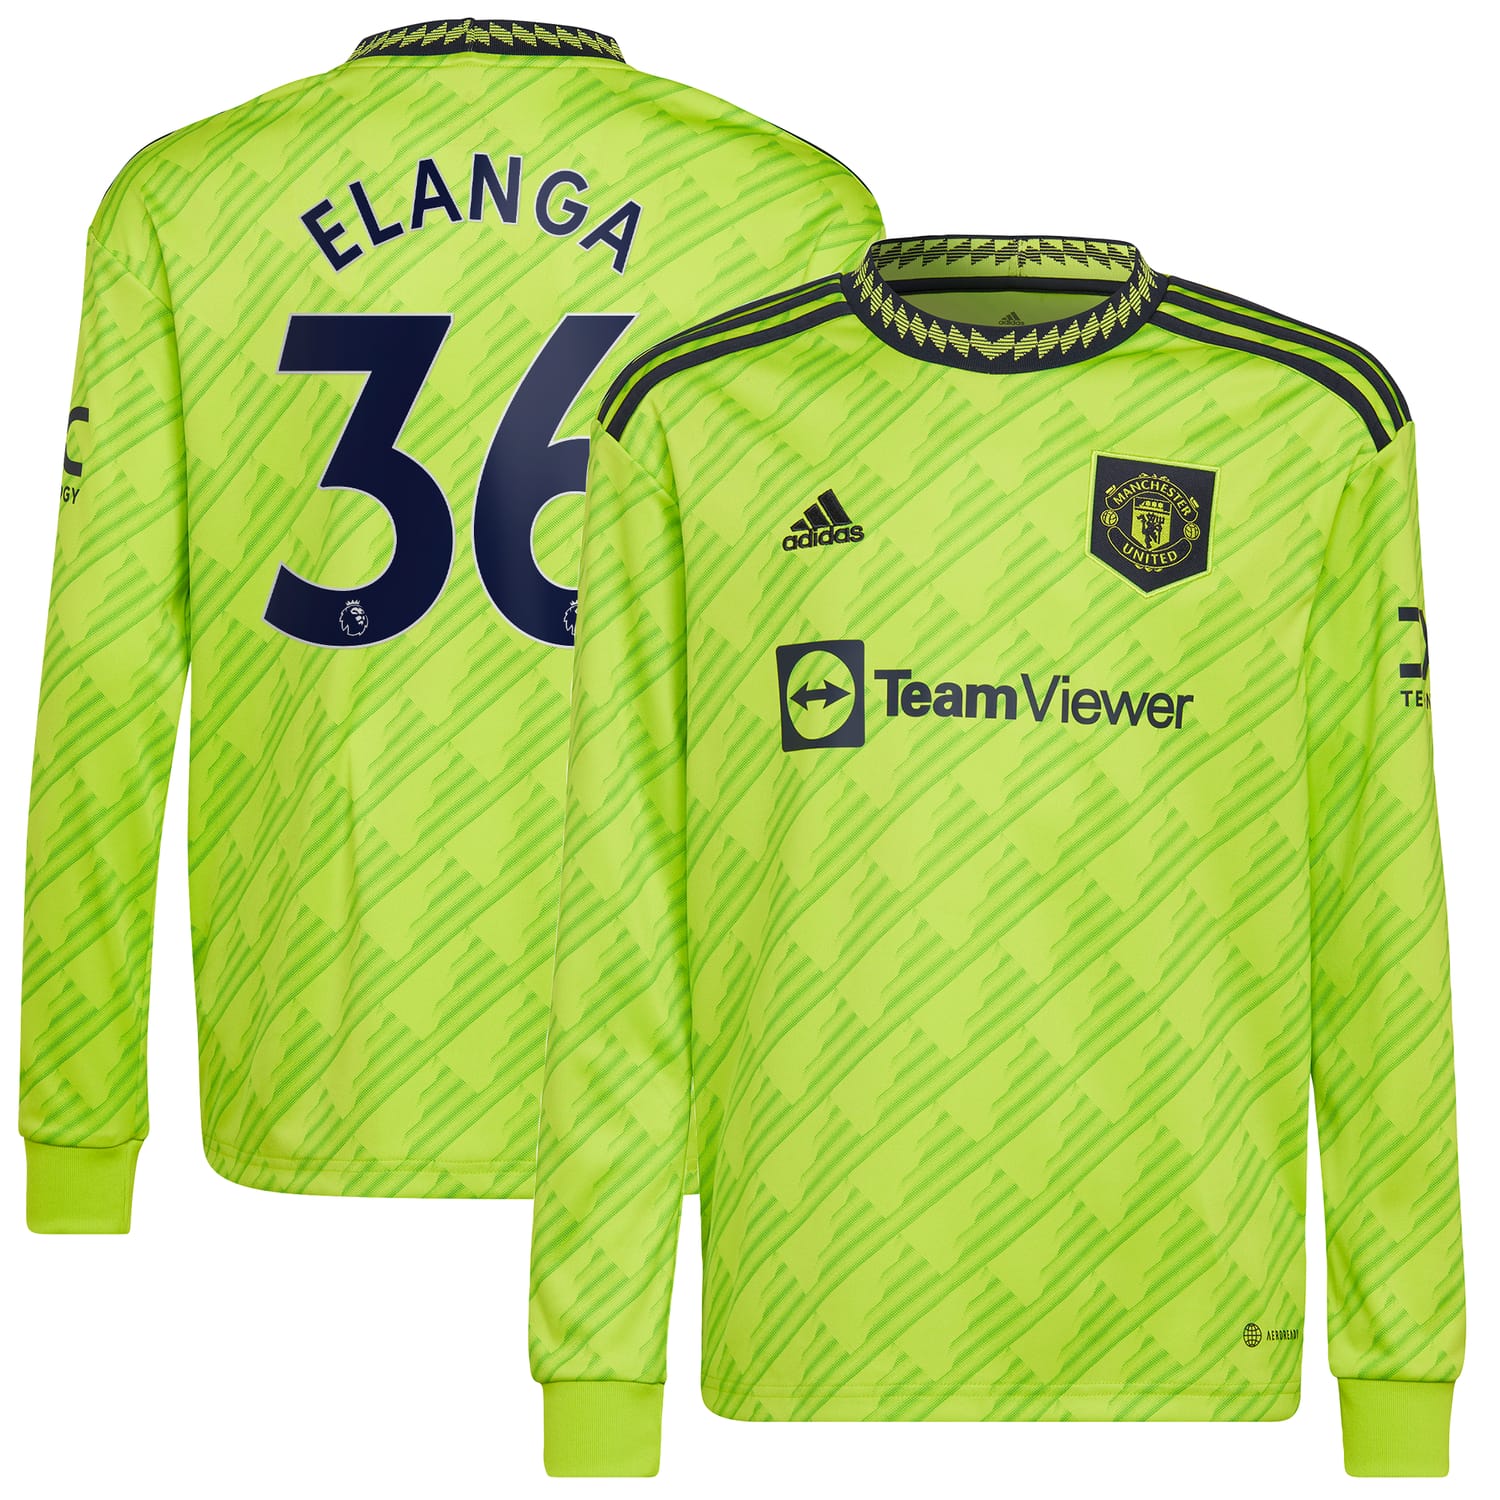 Premier League Manchester United Third Jersey Shirt Long Sleeve 2022-23 player Anthony Elanga 36 printing for Men